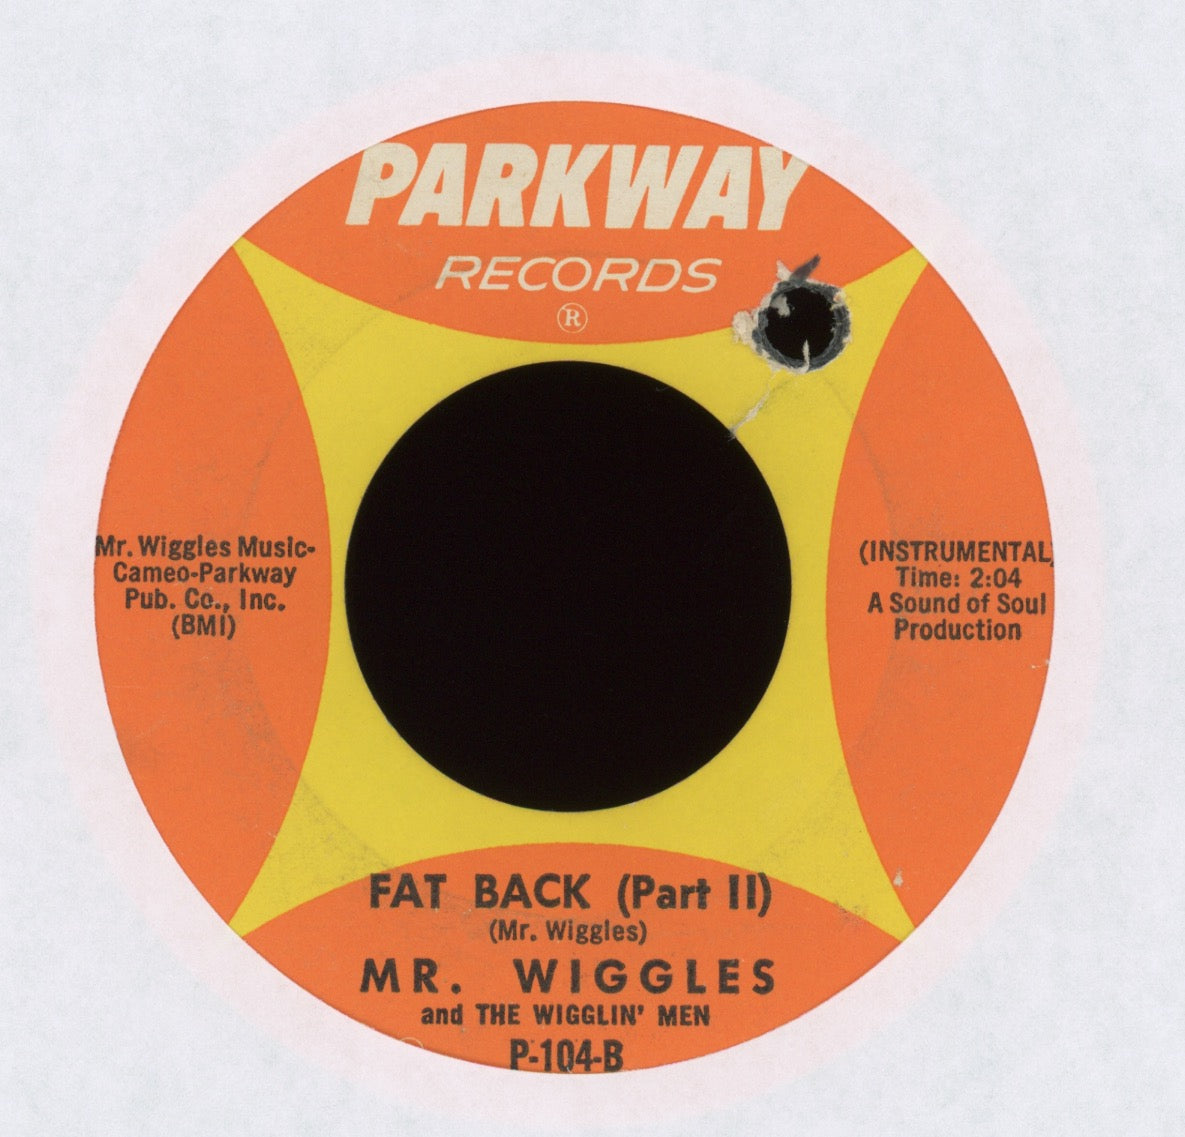 Mr. Wiggles - Fat Back on Parkway